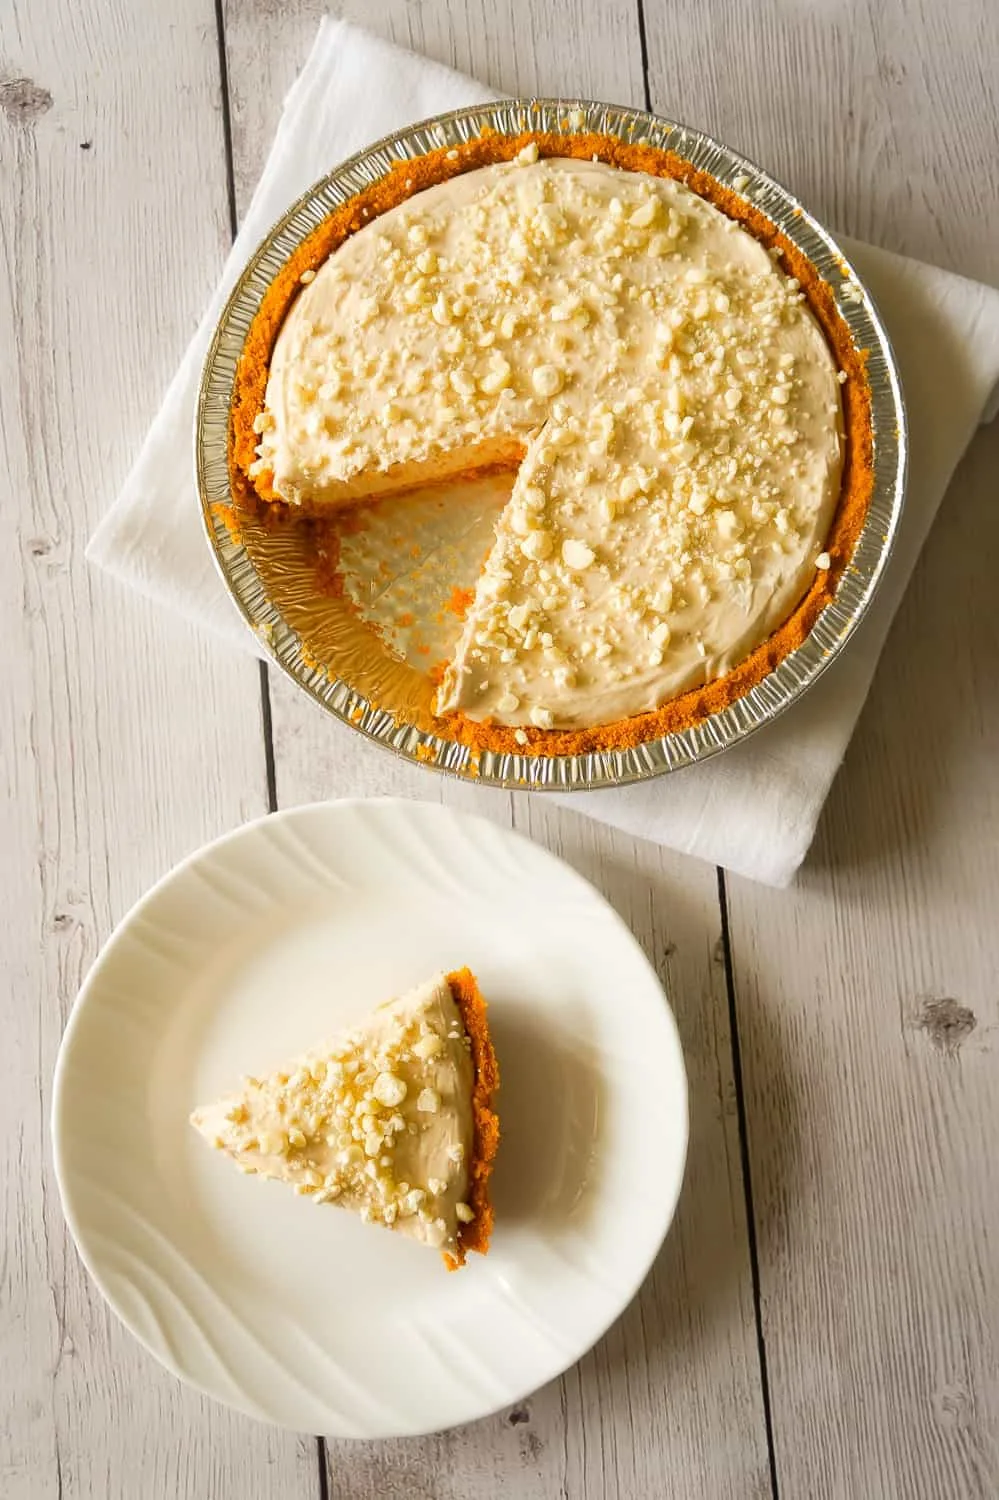 No Bake Pumpkin Spice White Chocolate Cheesecake is an easy fall dessert recipe made with pumpkin pie spice, white chocolate, Cool Whip and a graham cookie pie crust.